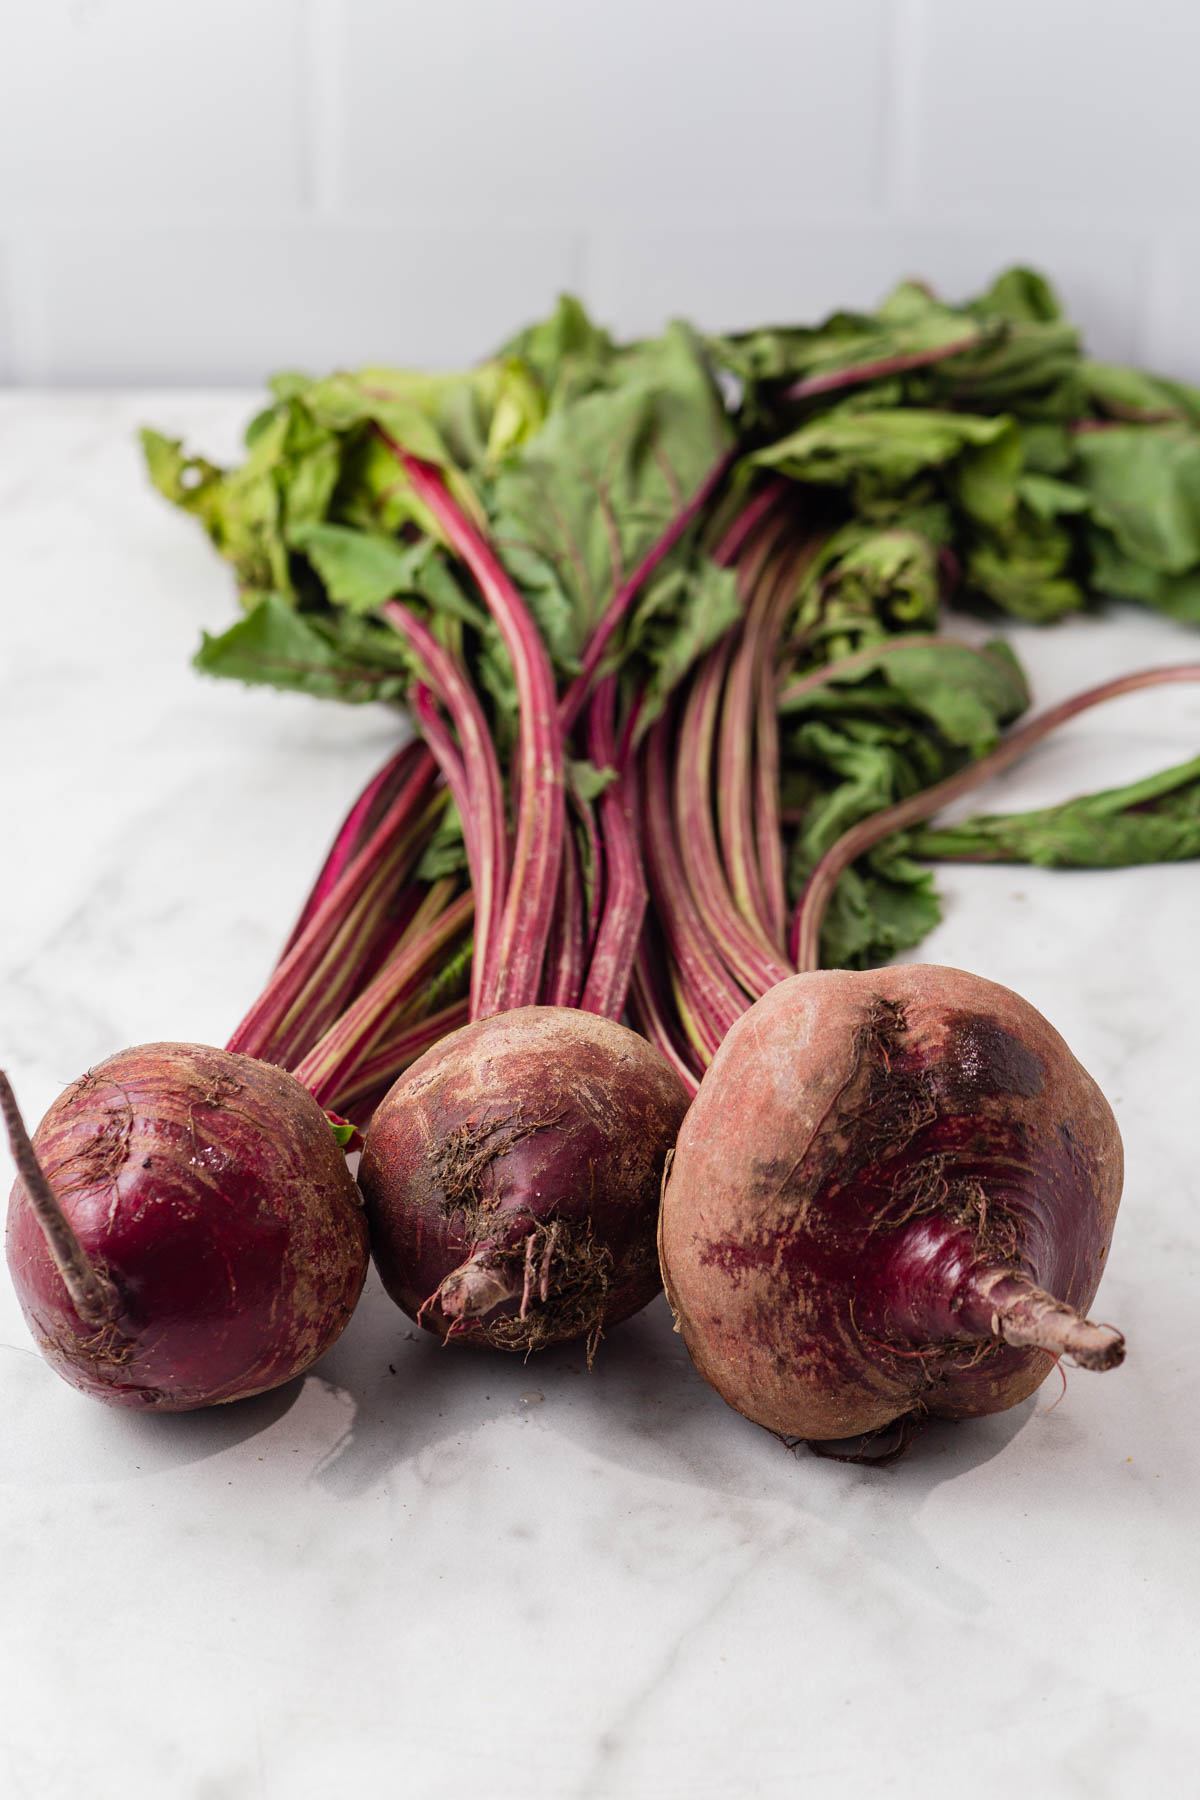 beets with greens.